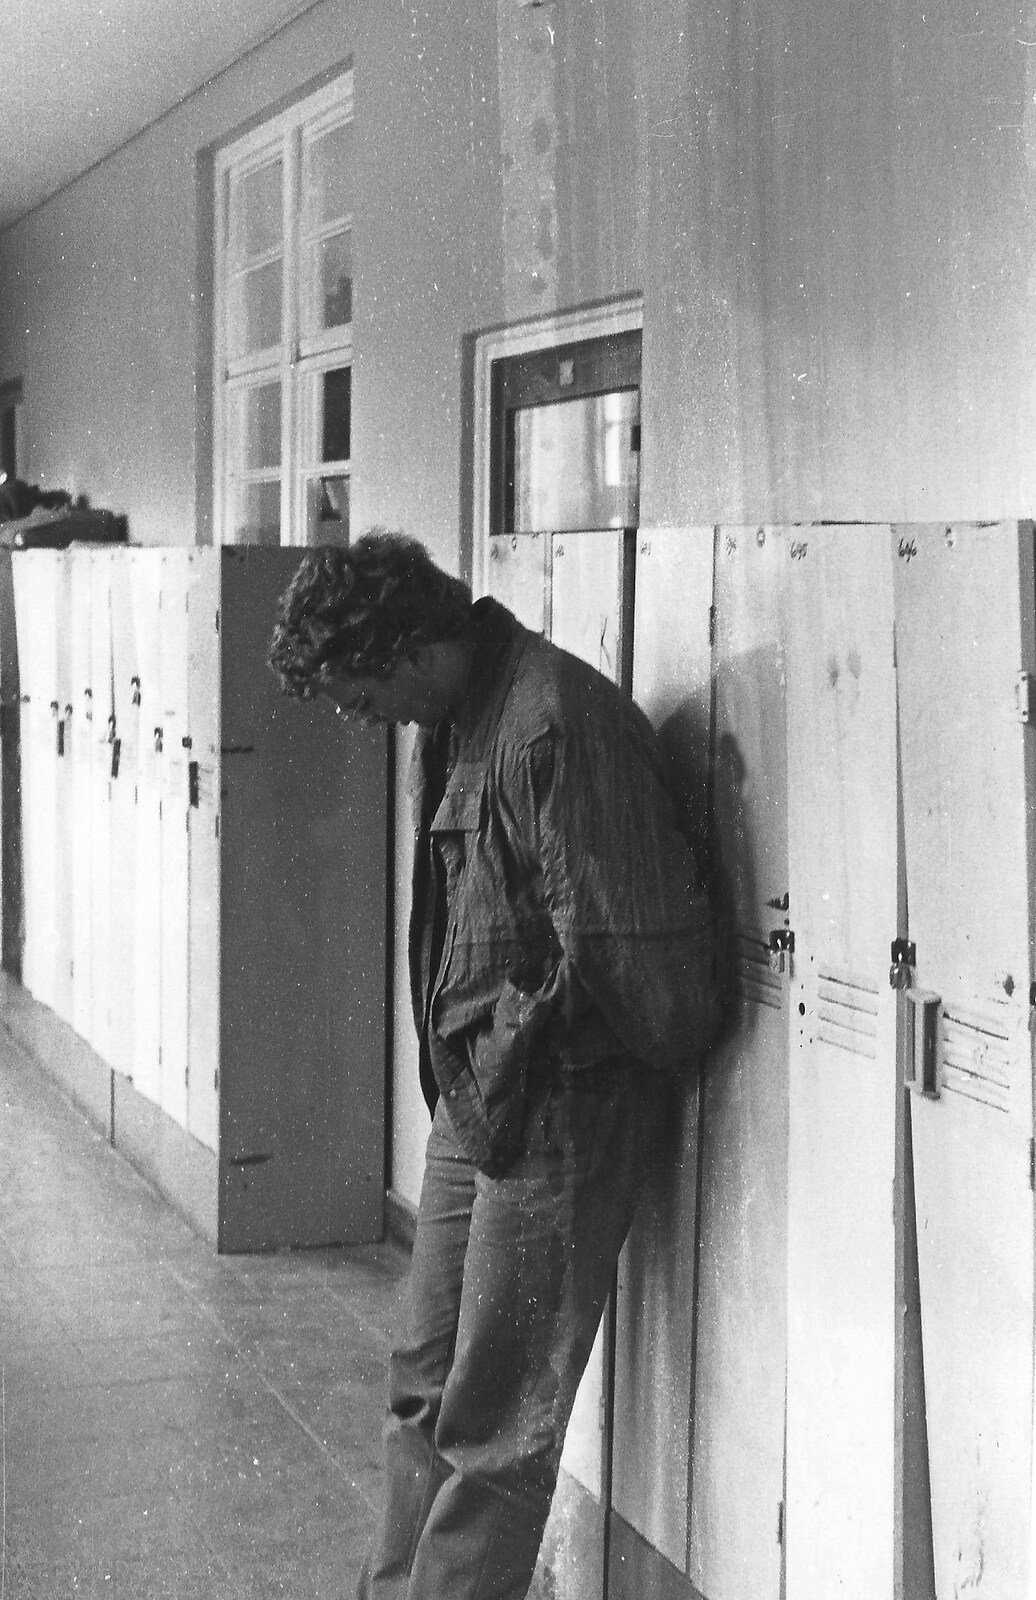 Herman hangs out by the lockers from Learning Black-and-White Photography, Brockenhurst College, Hampshire - 10th March 1985